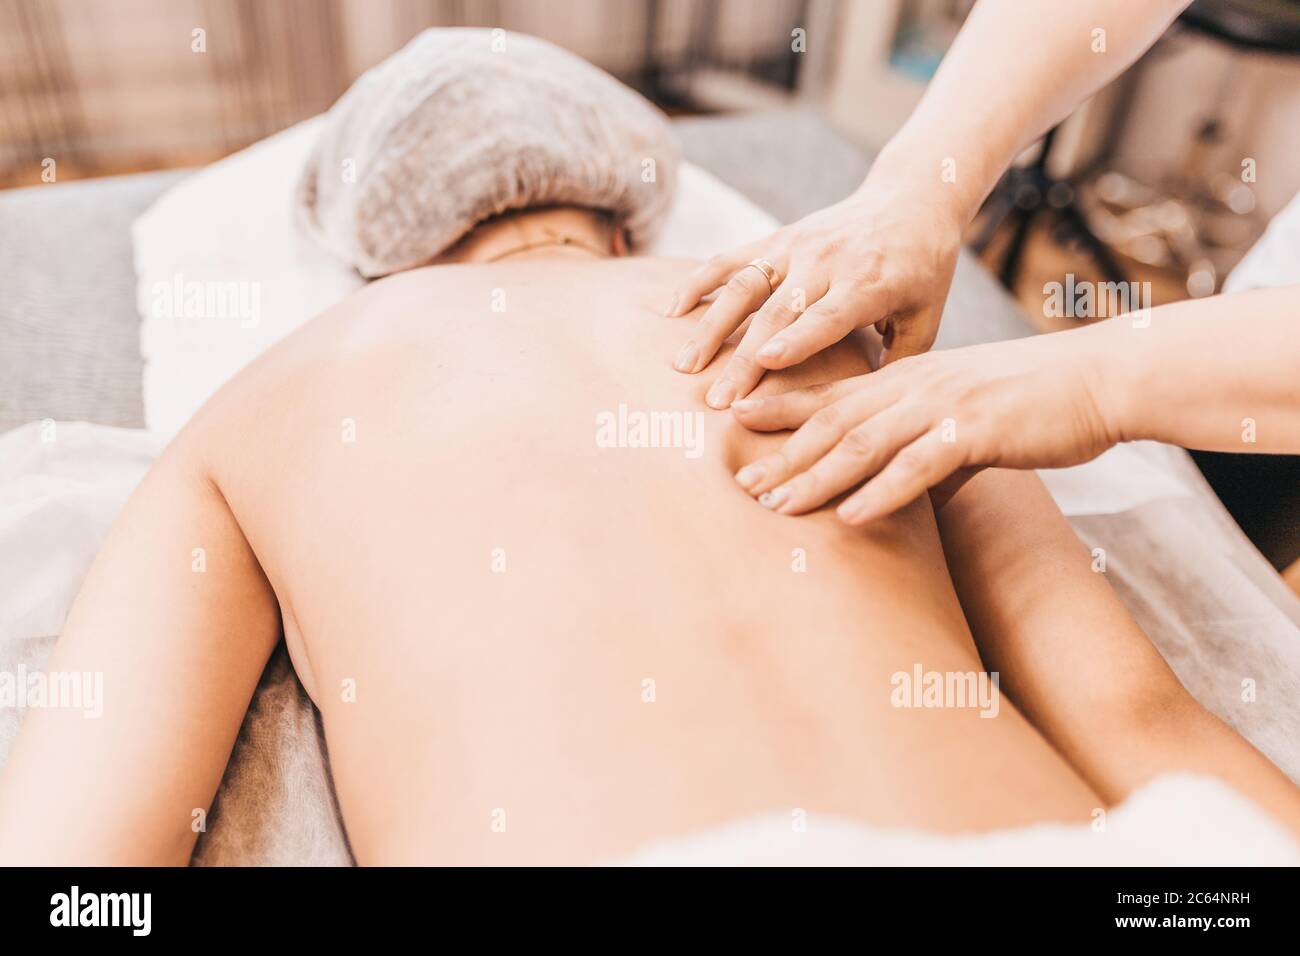 Treatment of pain and muscle spasm in the shoulder - sports traumatology - medical massage Stock Photo